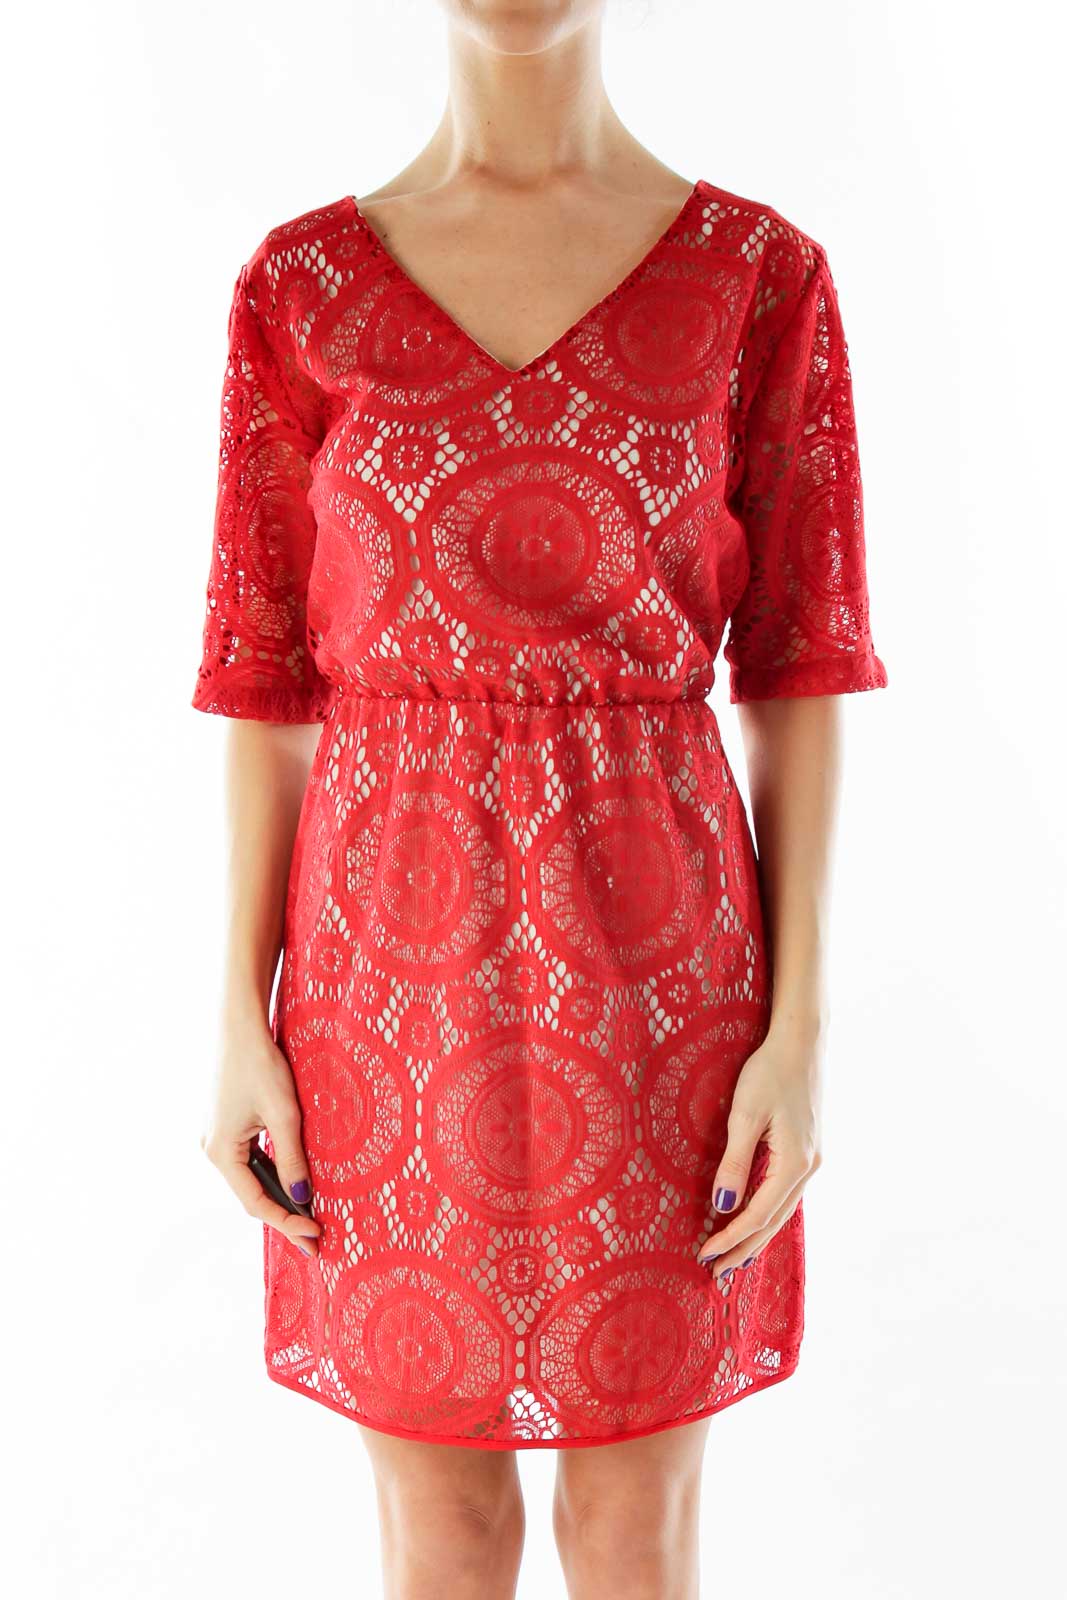 Red Lace Dress Front